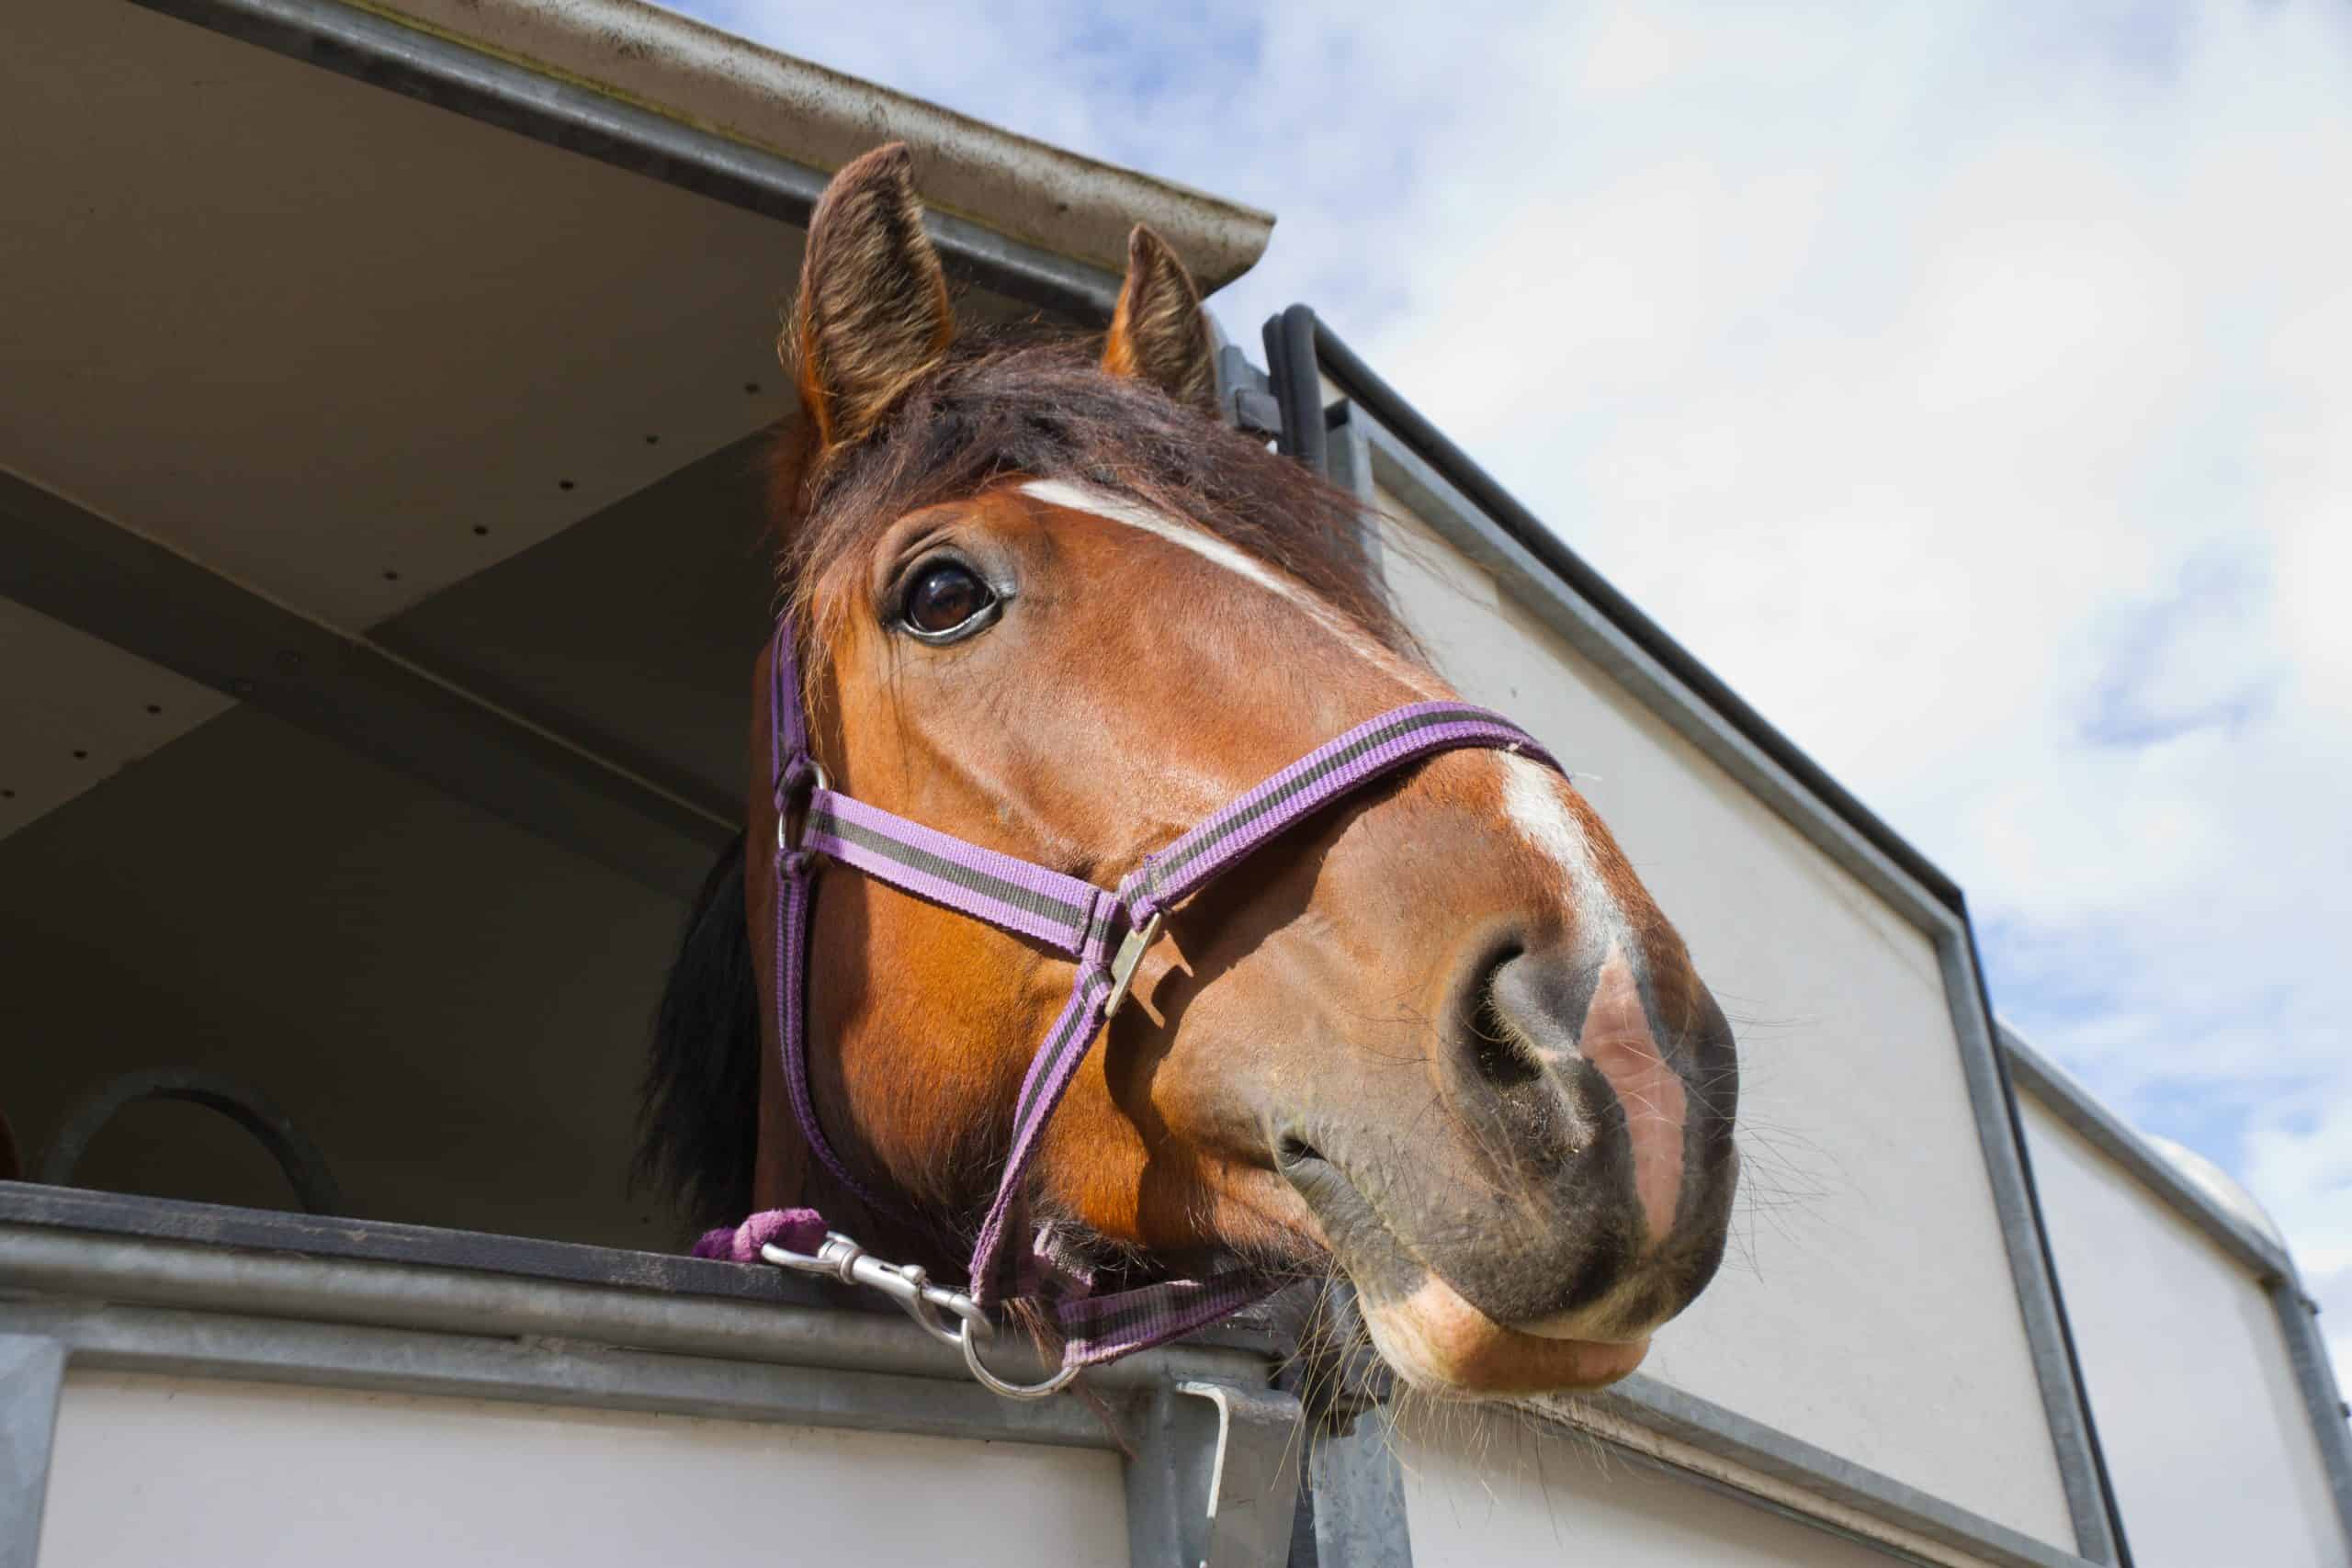 Close up of Bay horses head as it looks out from horse box which is transporting it to equine event.